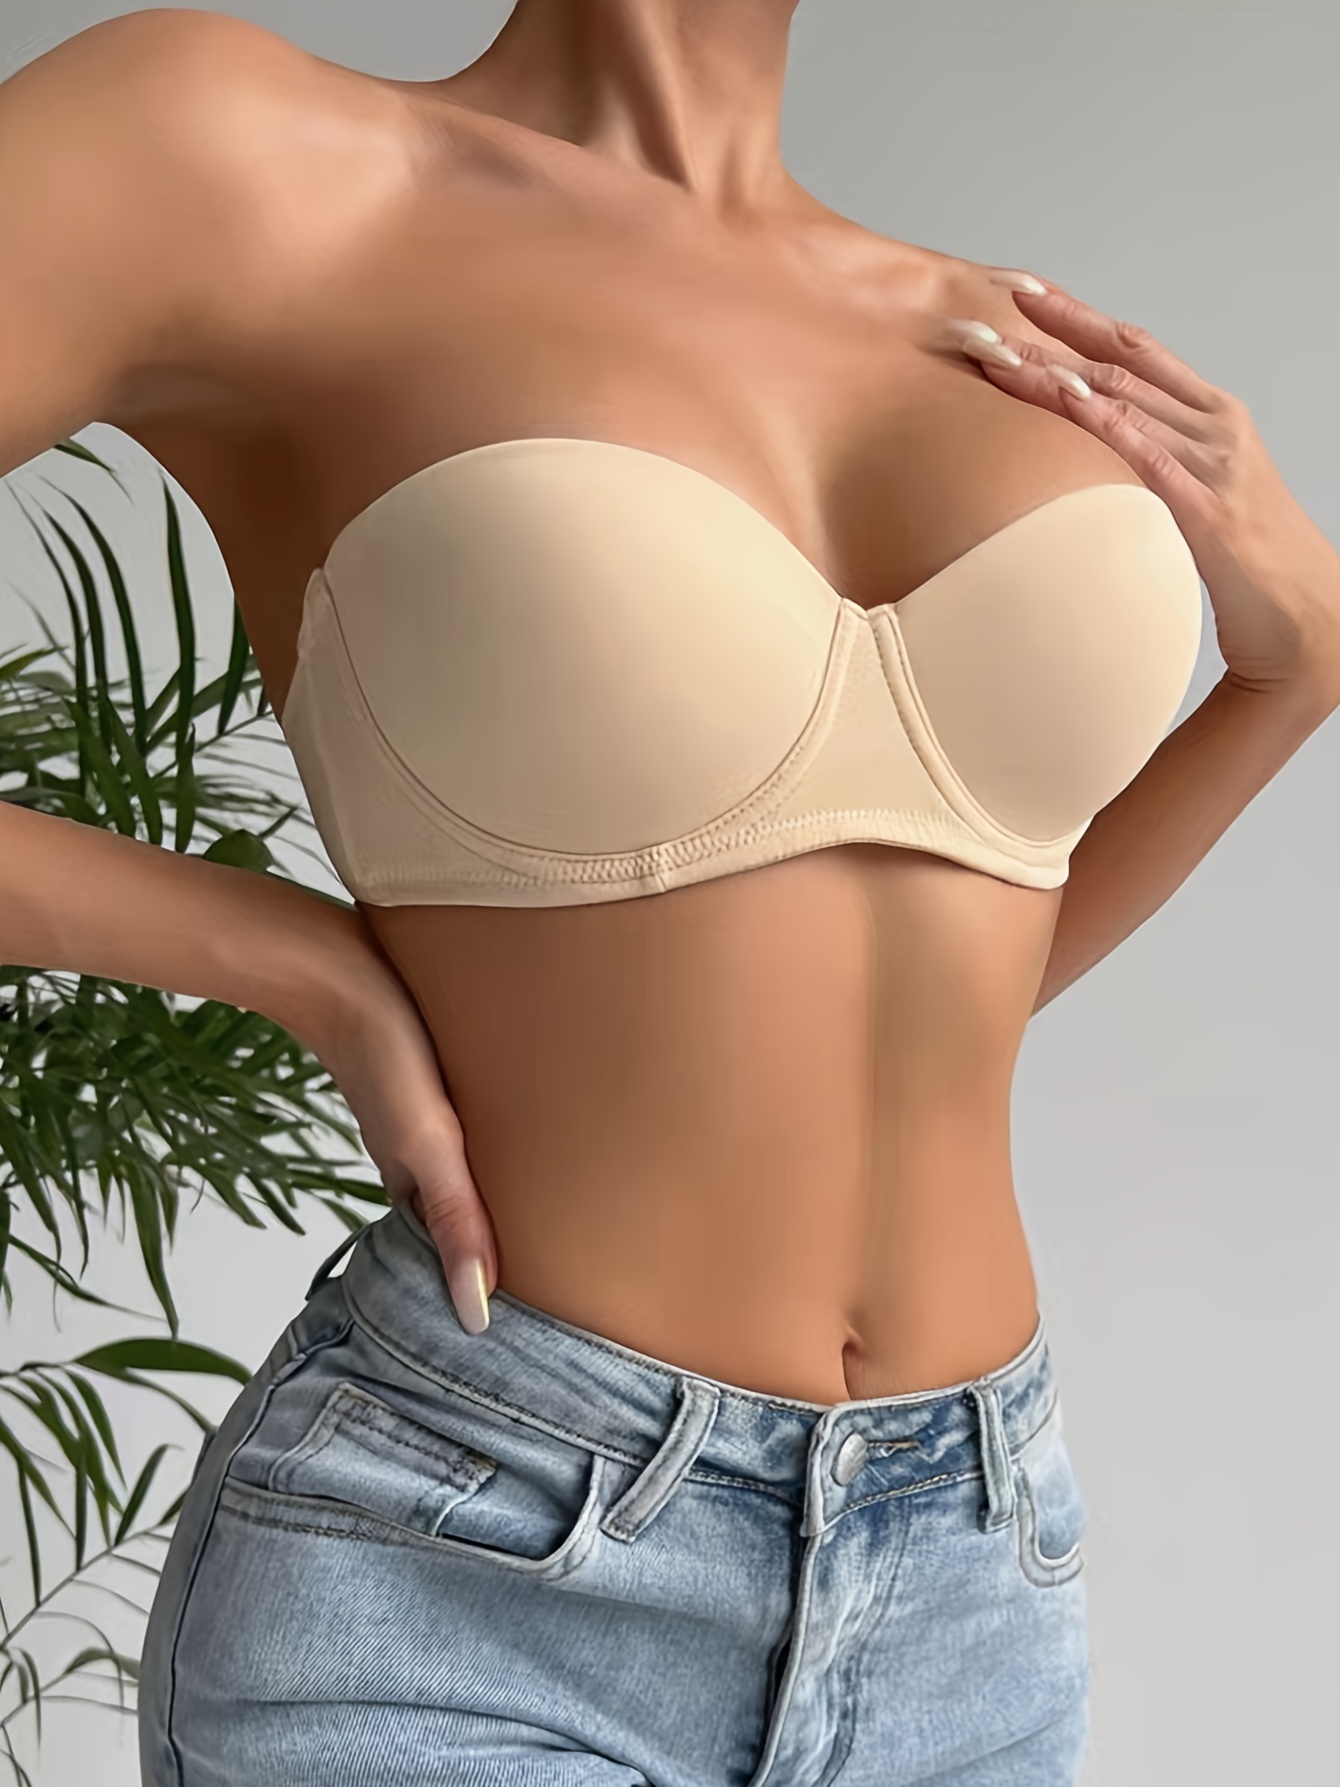 Eashery Underoutfit Bras for Women Women's Strapless Padded Push up Plus  Size Seamless Underwired Convertible Bras Beige Small 